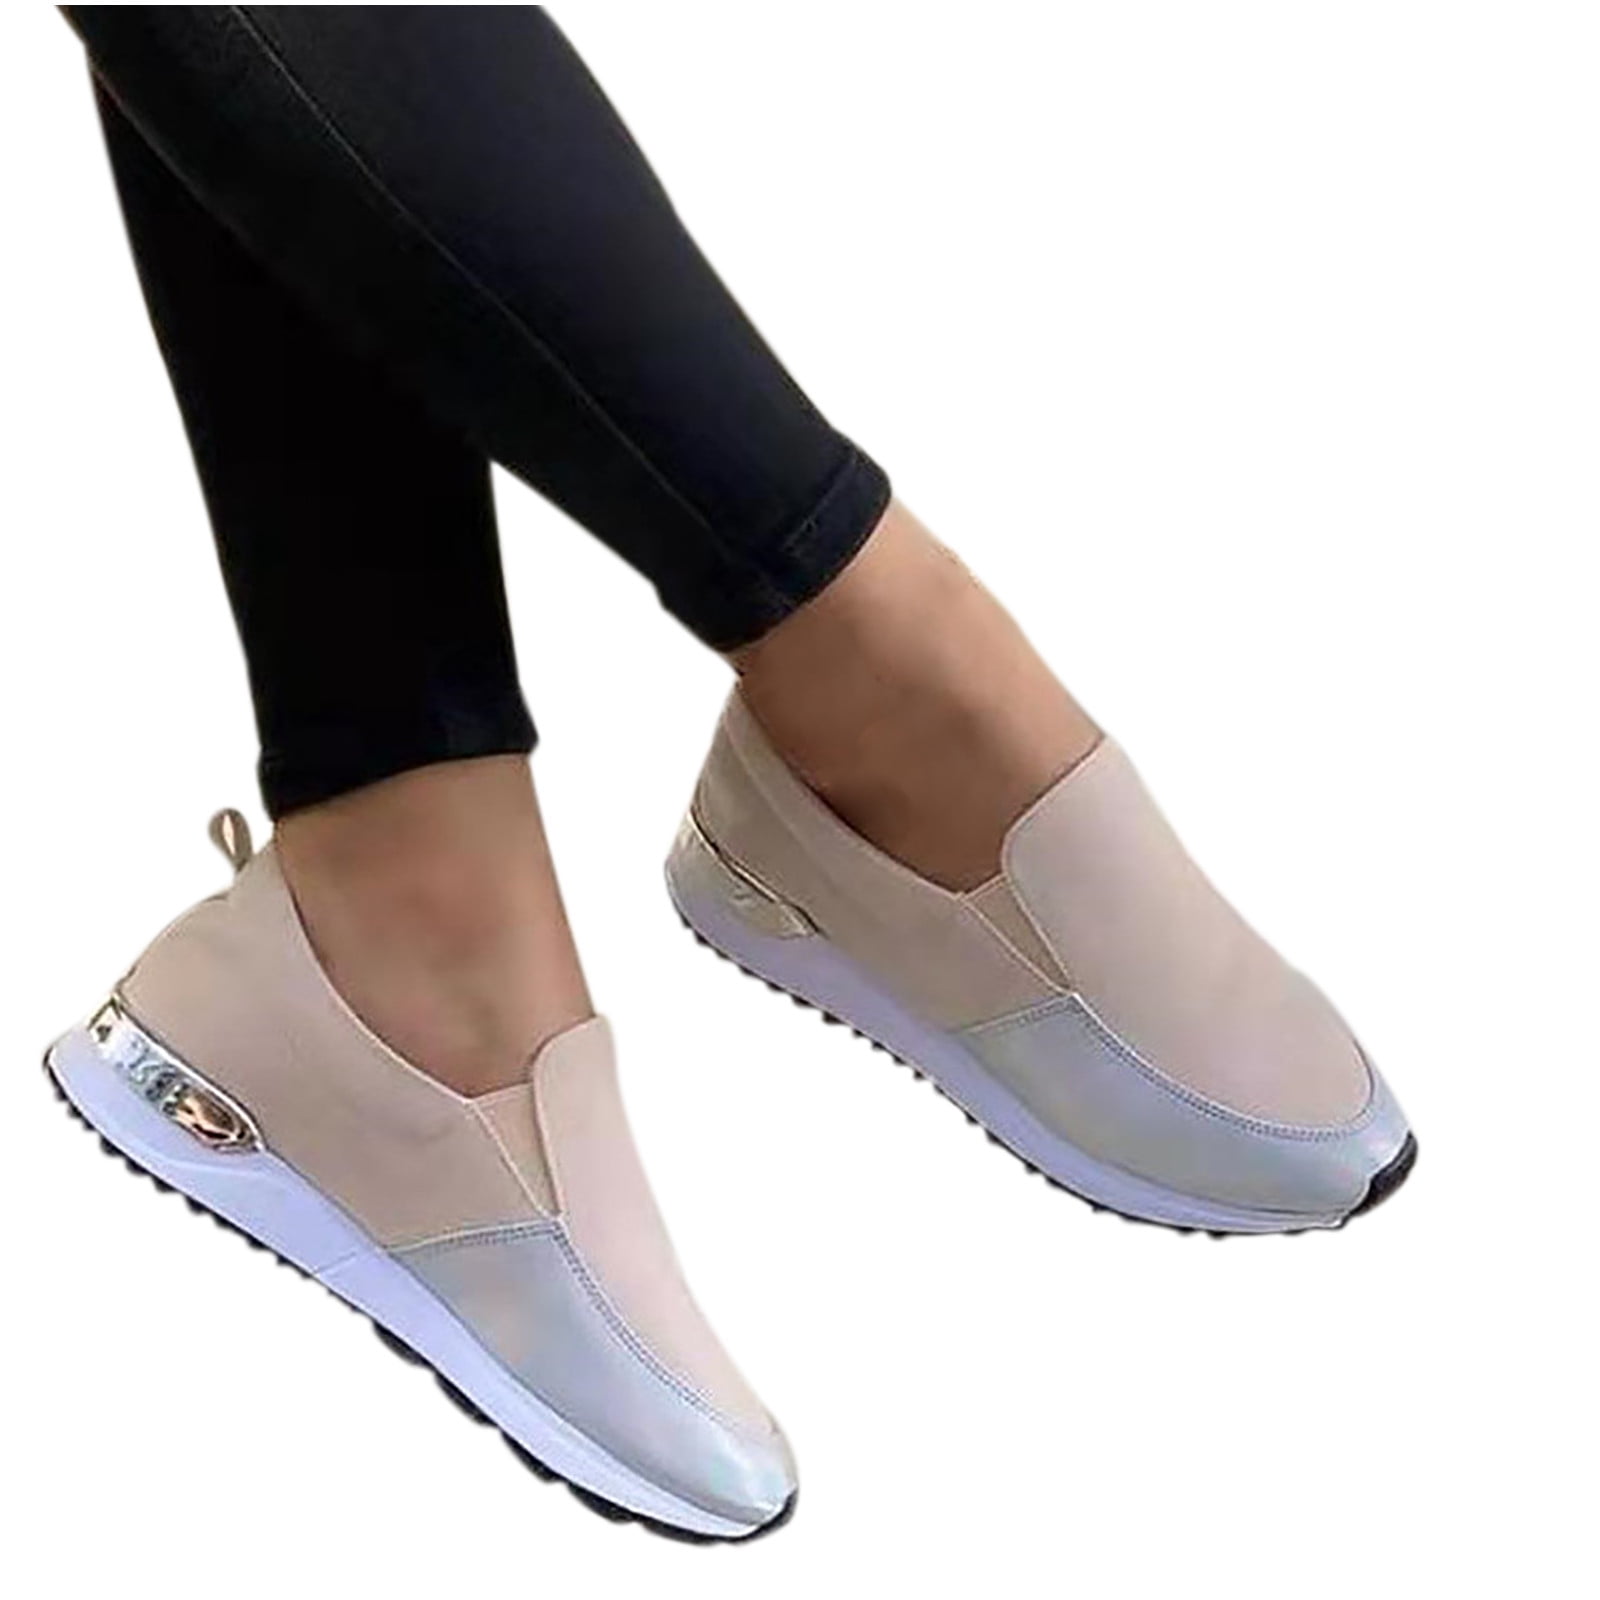 Women Sneakers Clearance NEARTIME Women Shallow Casual Slip-On Shoes Breathable Flat Canvas Soft Running Ankle Shoes